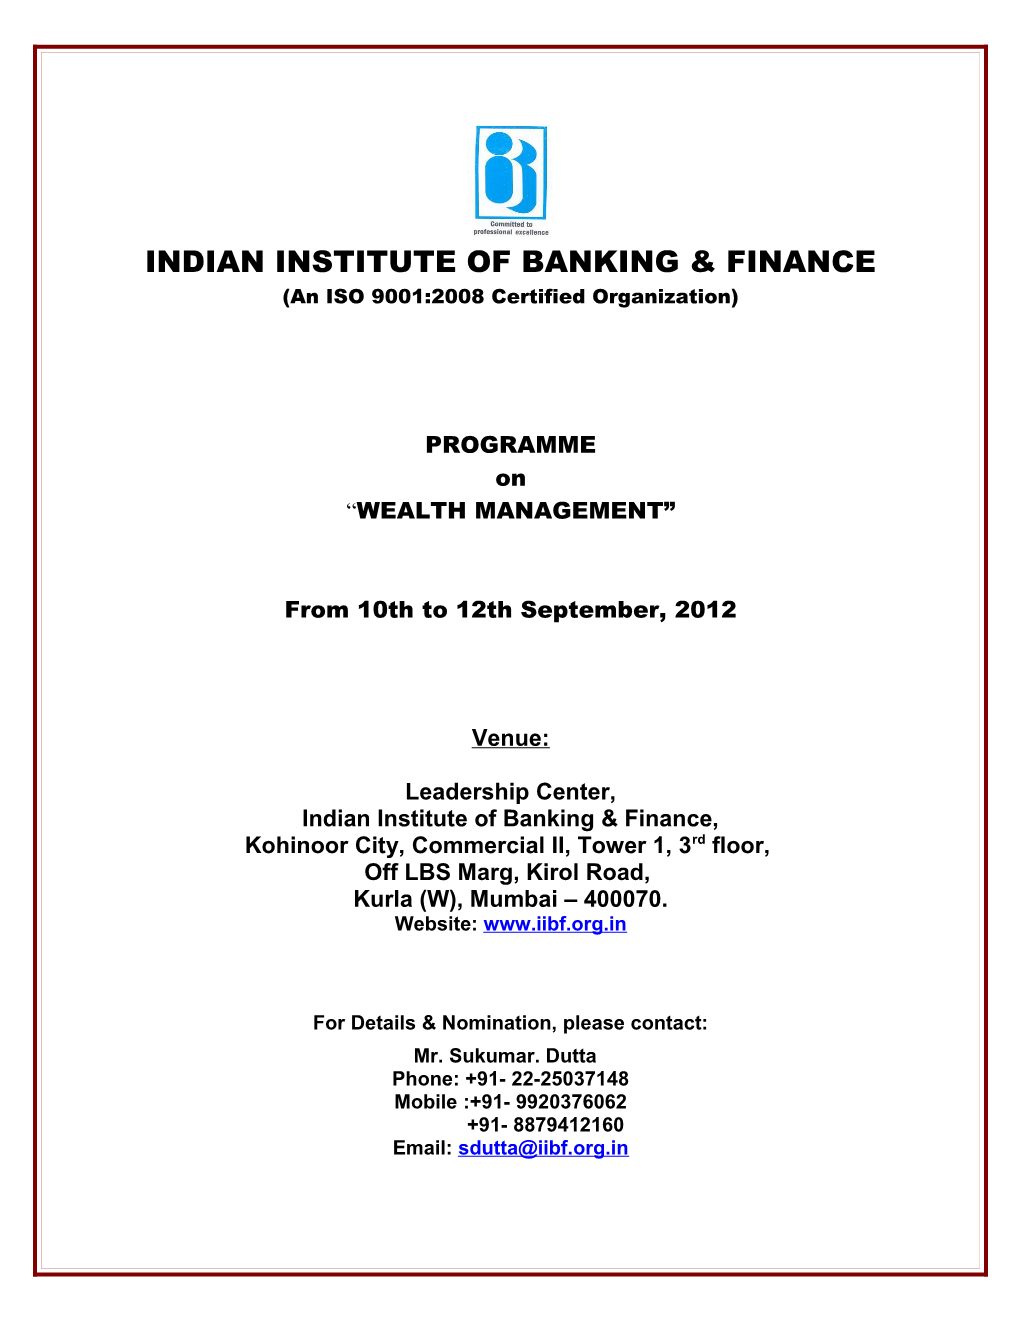 Indian Institute of Banking & Finance